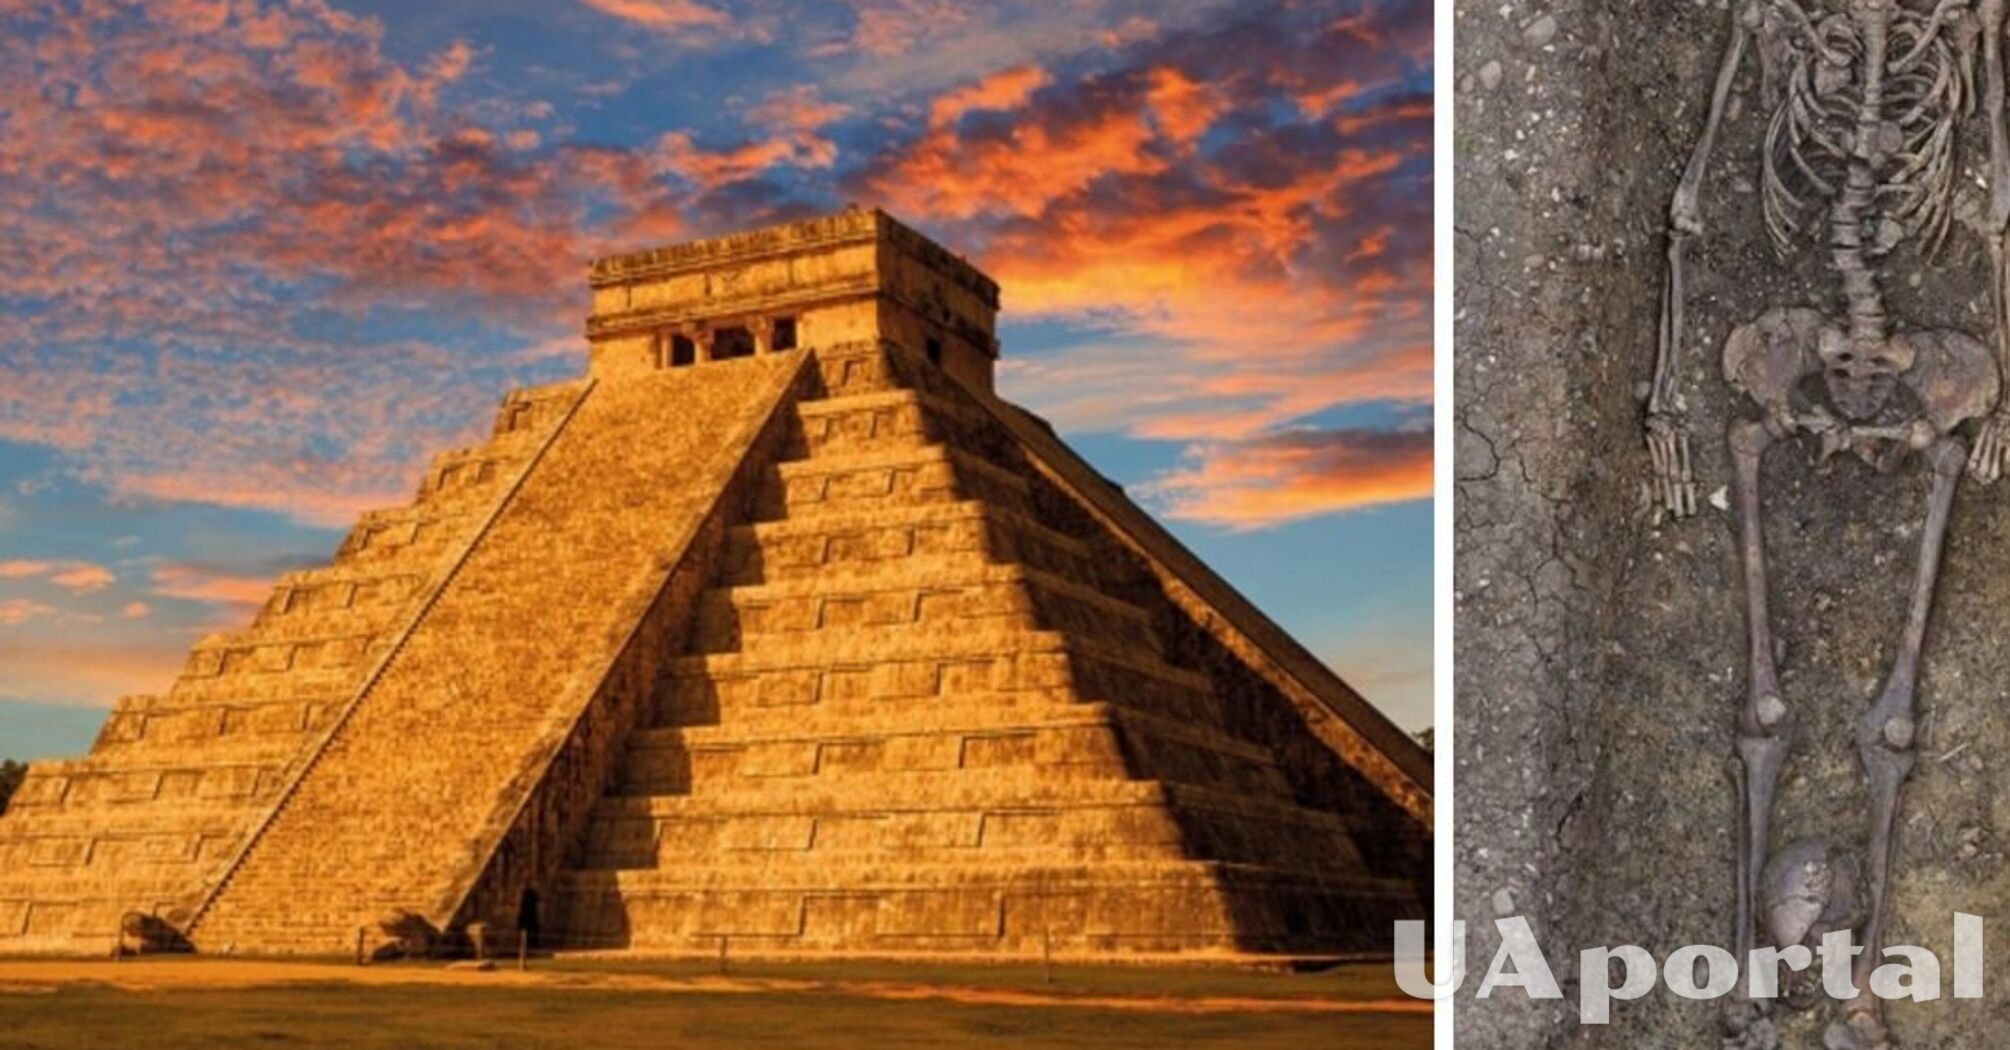 Gruesome discovery: 20 decapitated bodies found in Mayan death pyramid